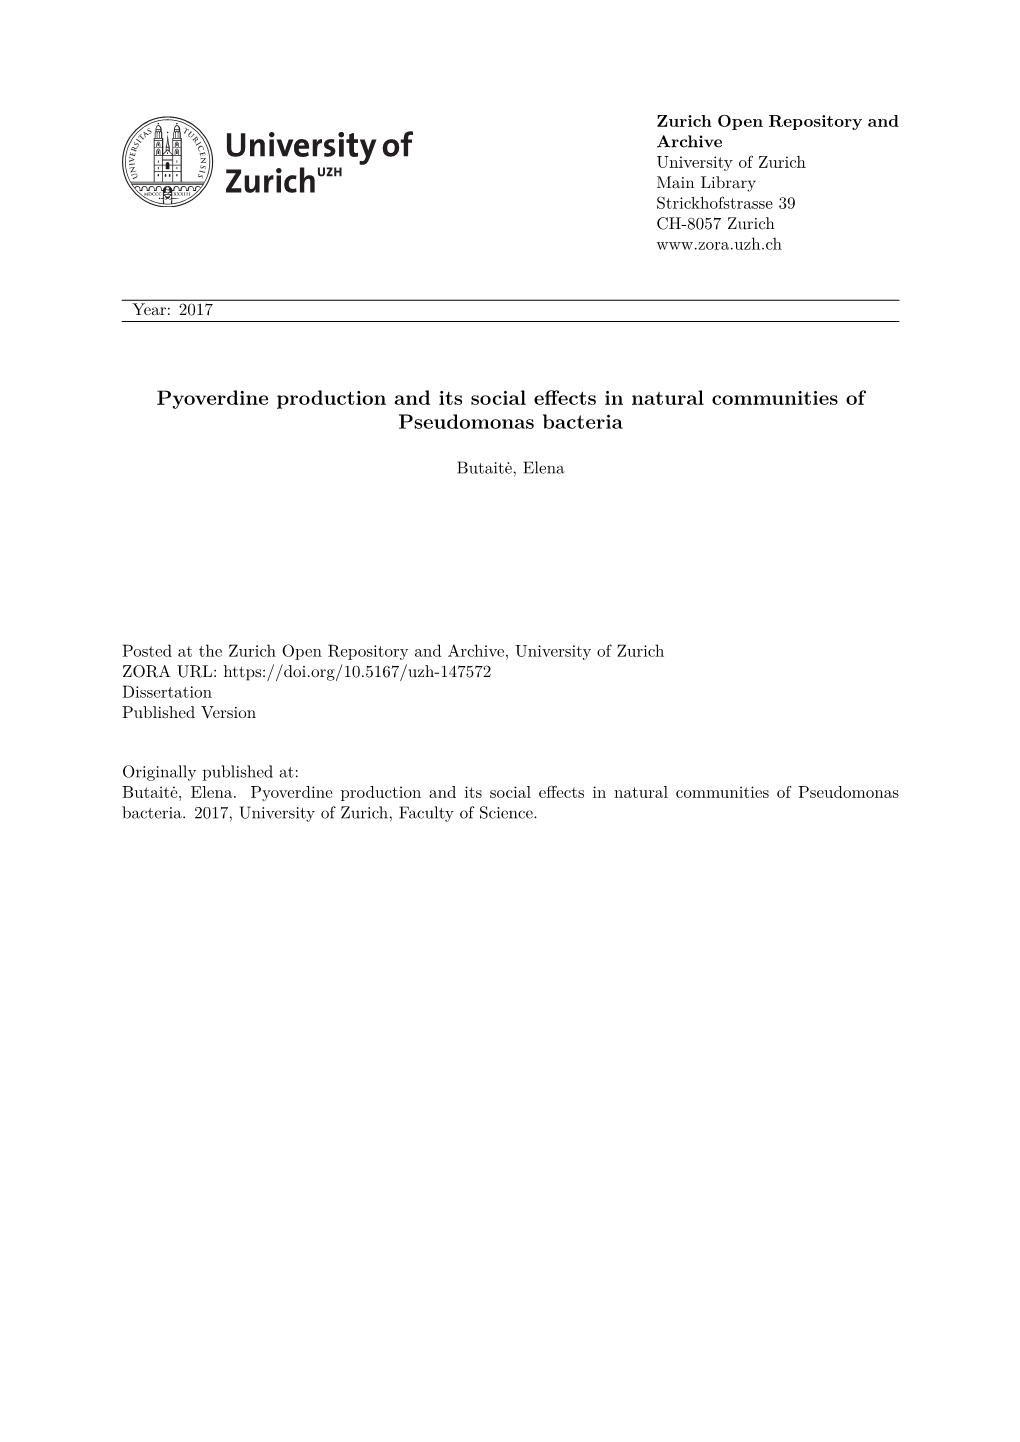 Pyoverdine Production and Its Social Effects in Natural Communities of Pseudomonas Bacteria